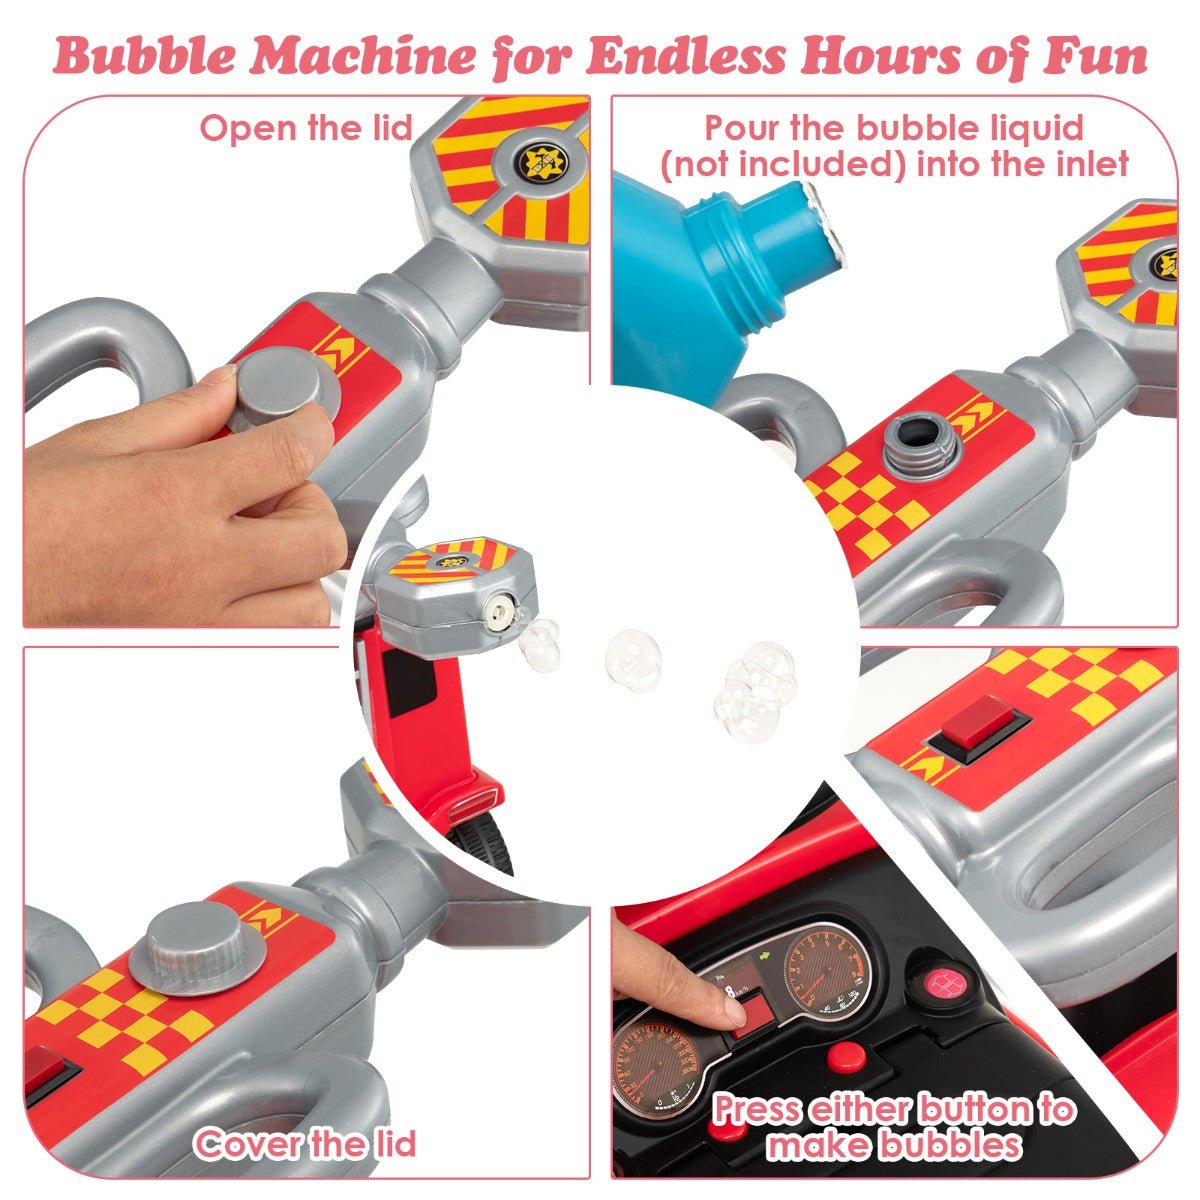 Fun and Bubbles: Ride On Fire Truck for Kids with Bubble Function